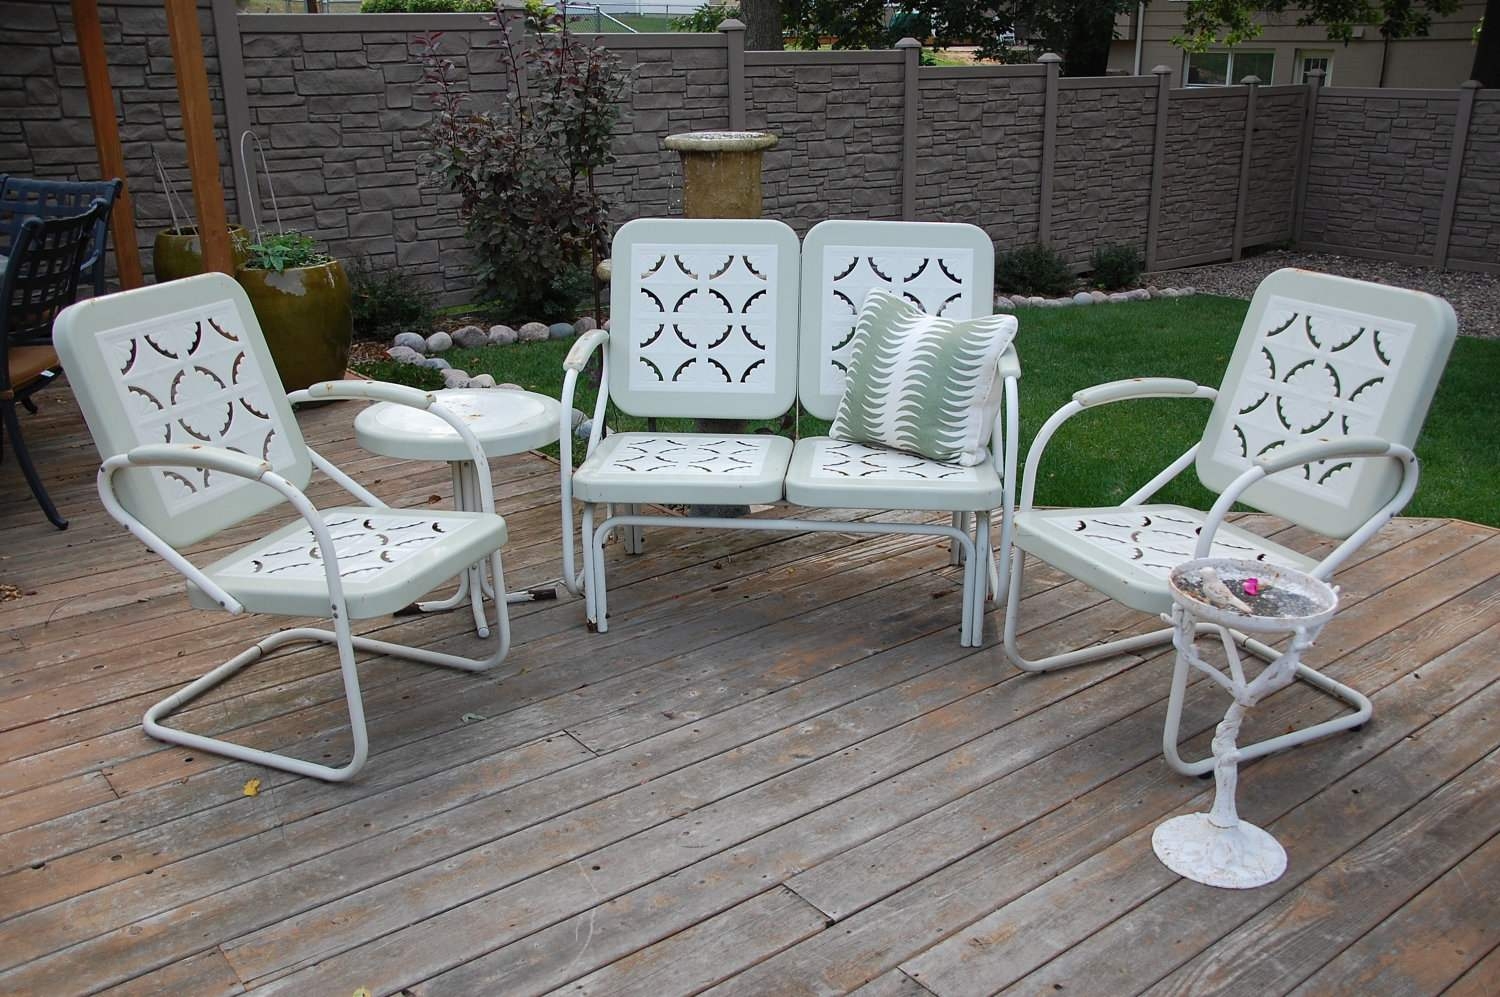 Vintage Metal Lawn Chairs You Ll Love, Old Outdoor Steel Chairs